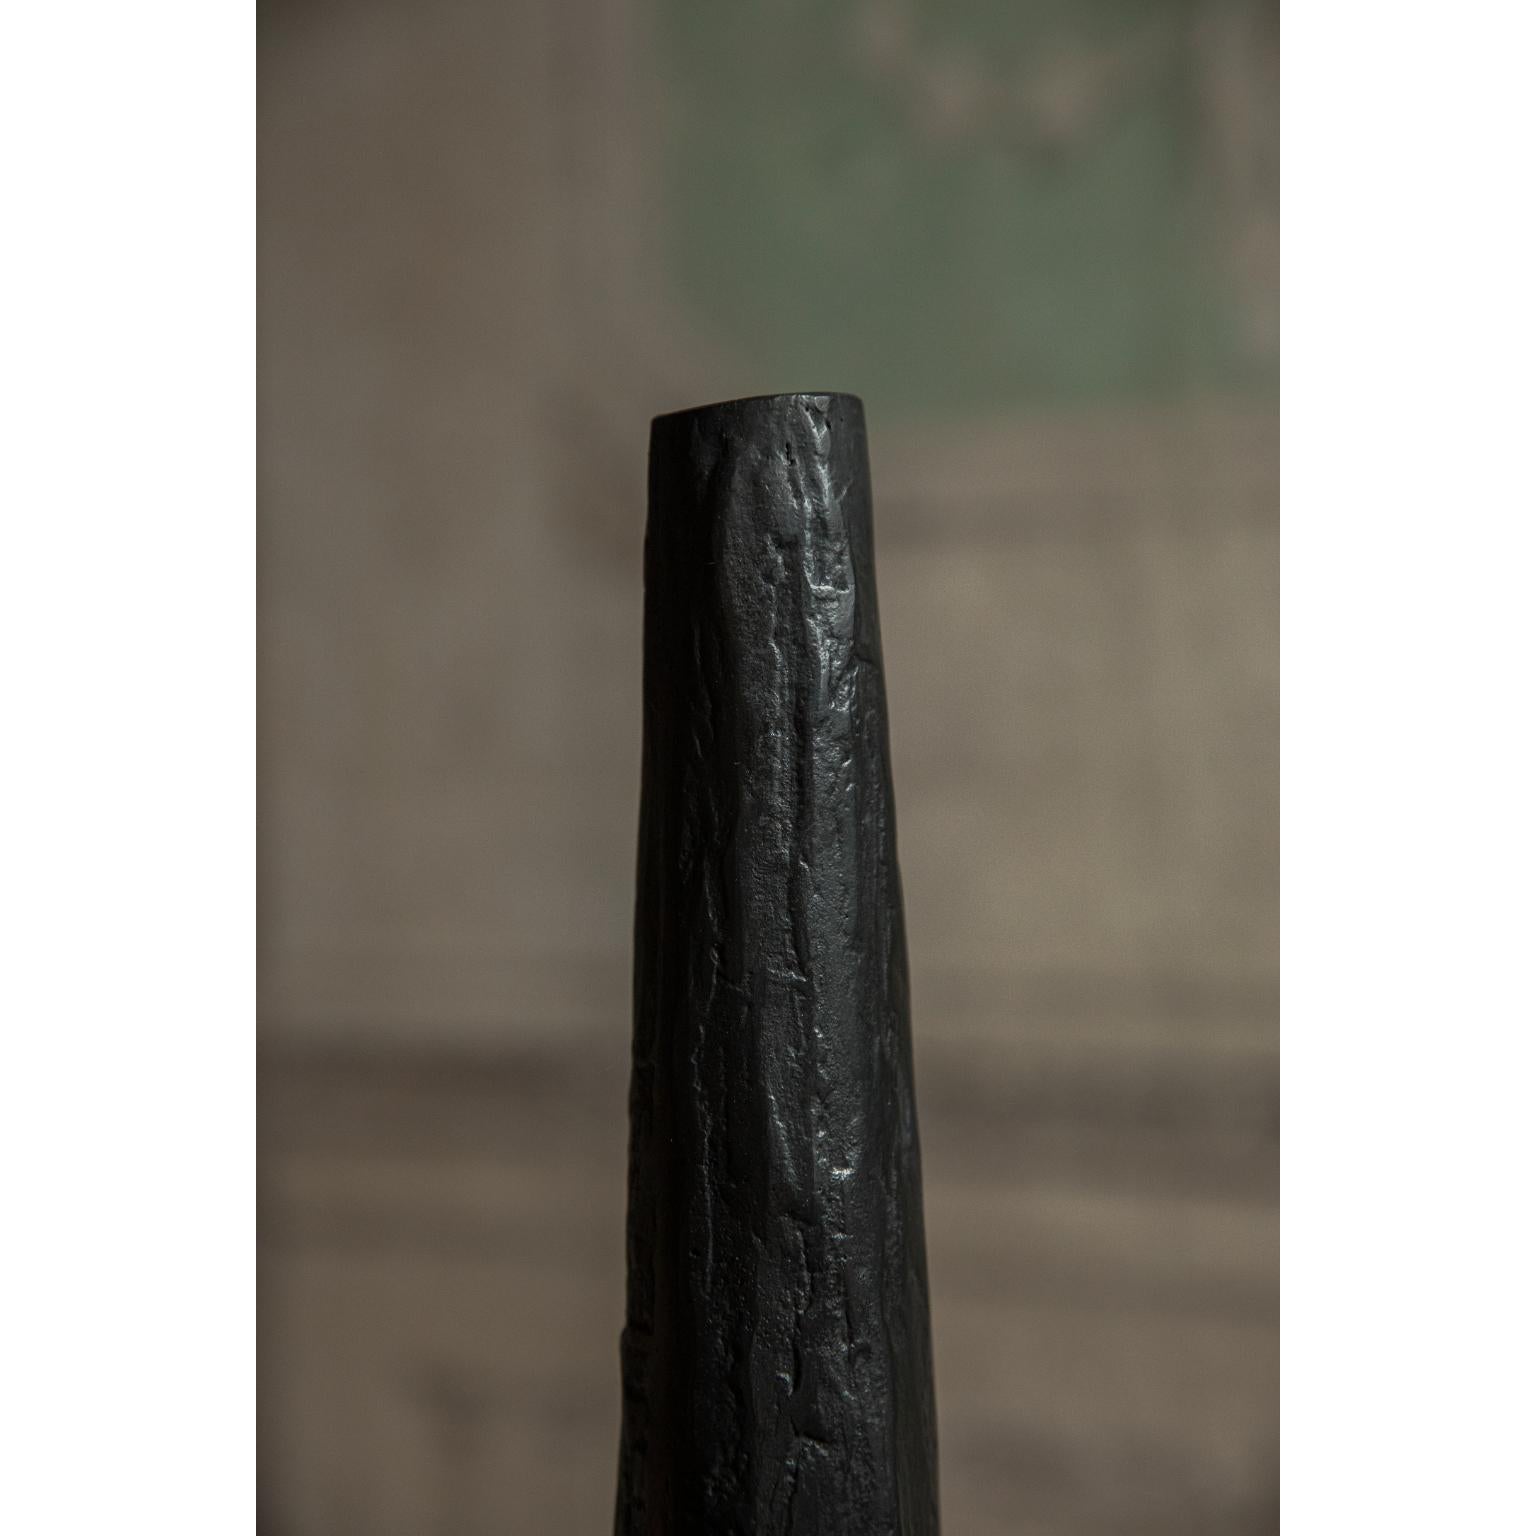 Tall bronze candle pillar by Rick Owens
2015
Dimensions: L 7.5 x W 7.5 x H 35 cm
Materials: Bronze
Weight: 2.8 kg

Rick Owens is a California-born fashion and furniture has developed a unique style that he describes as “luxe